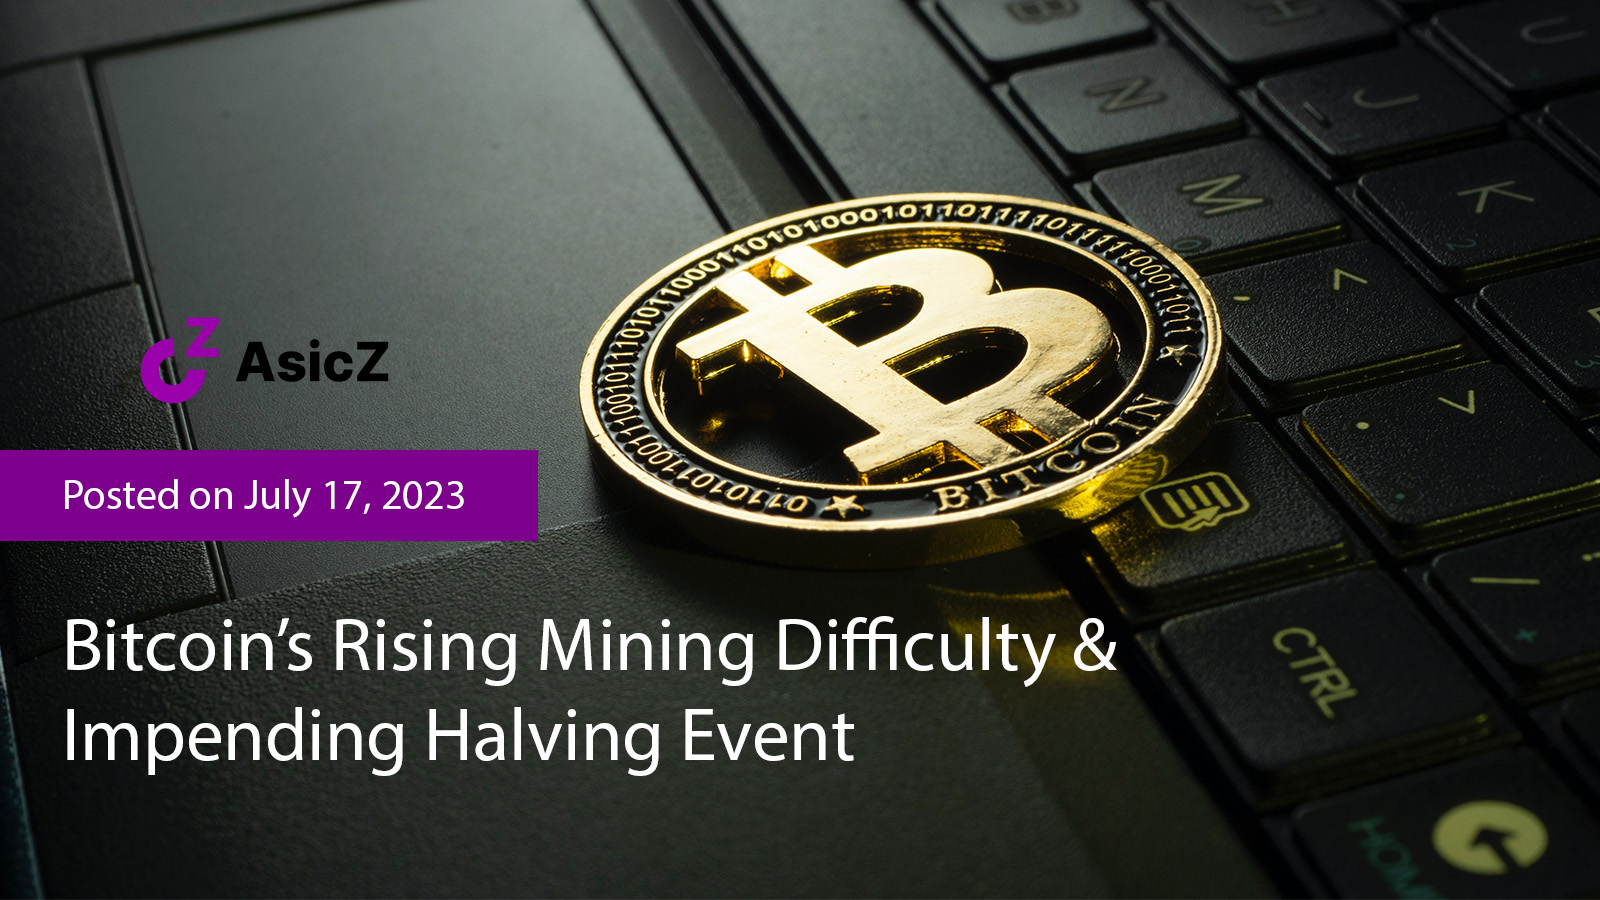 Bitcoin’s Rising Mining Difficulty & Impending Halving Event